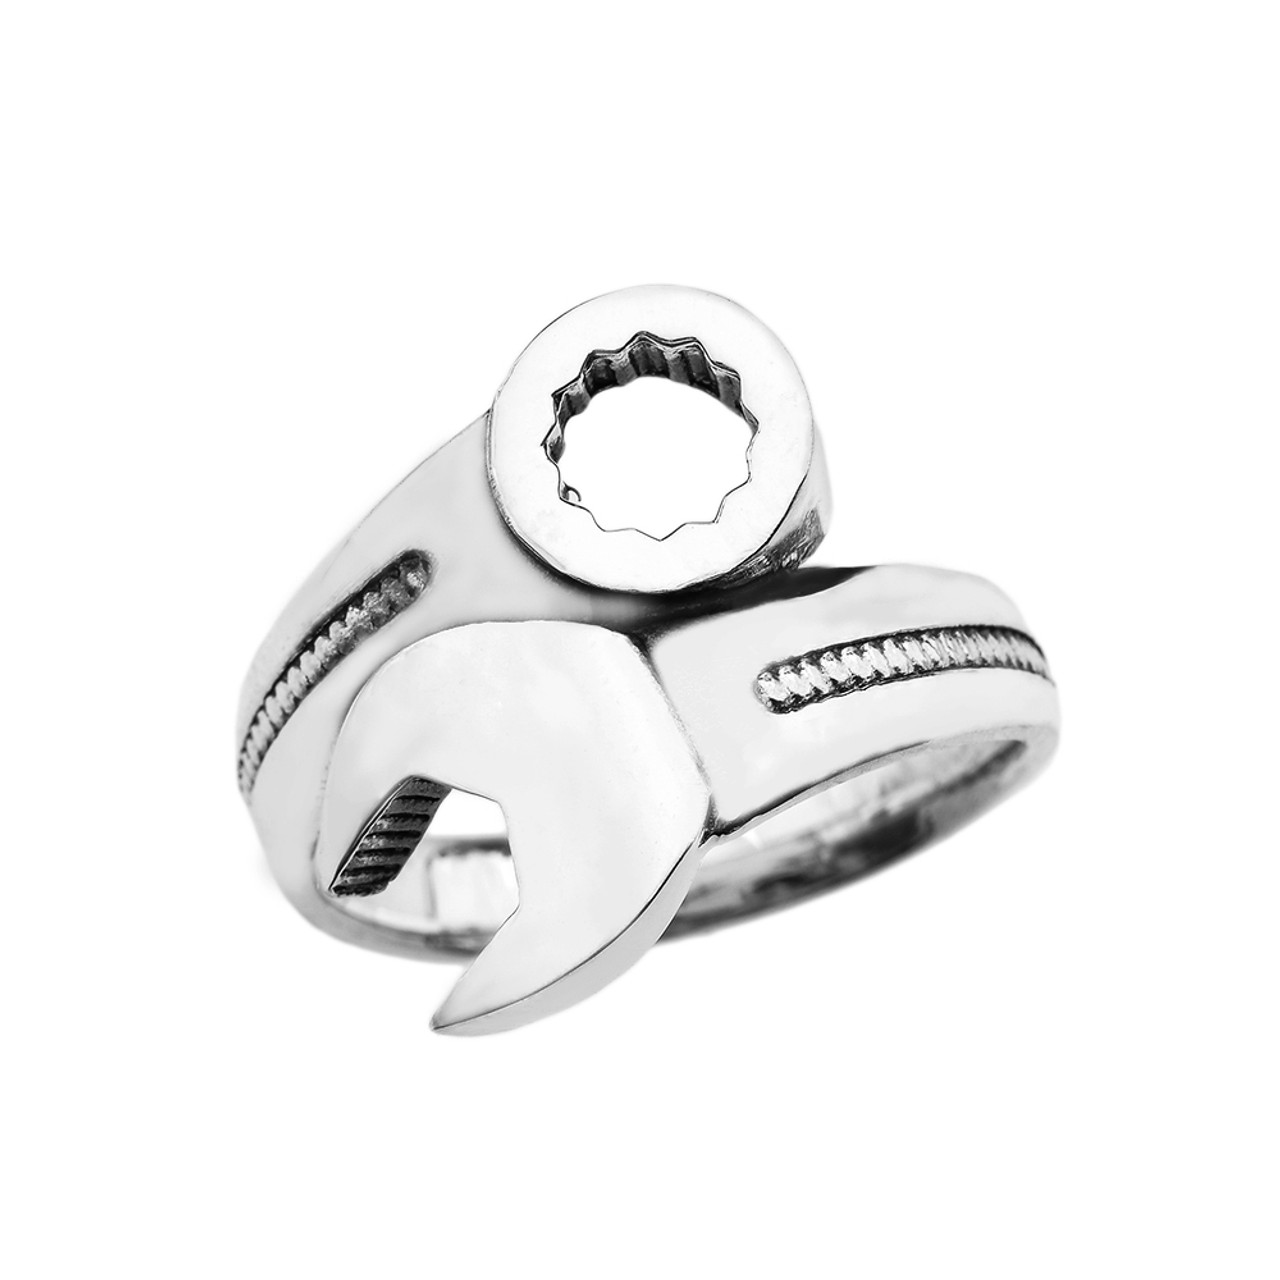 Mechanic Wrench Sterling Silver Ring